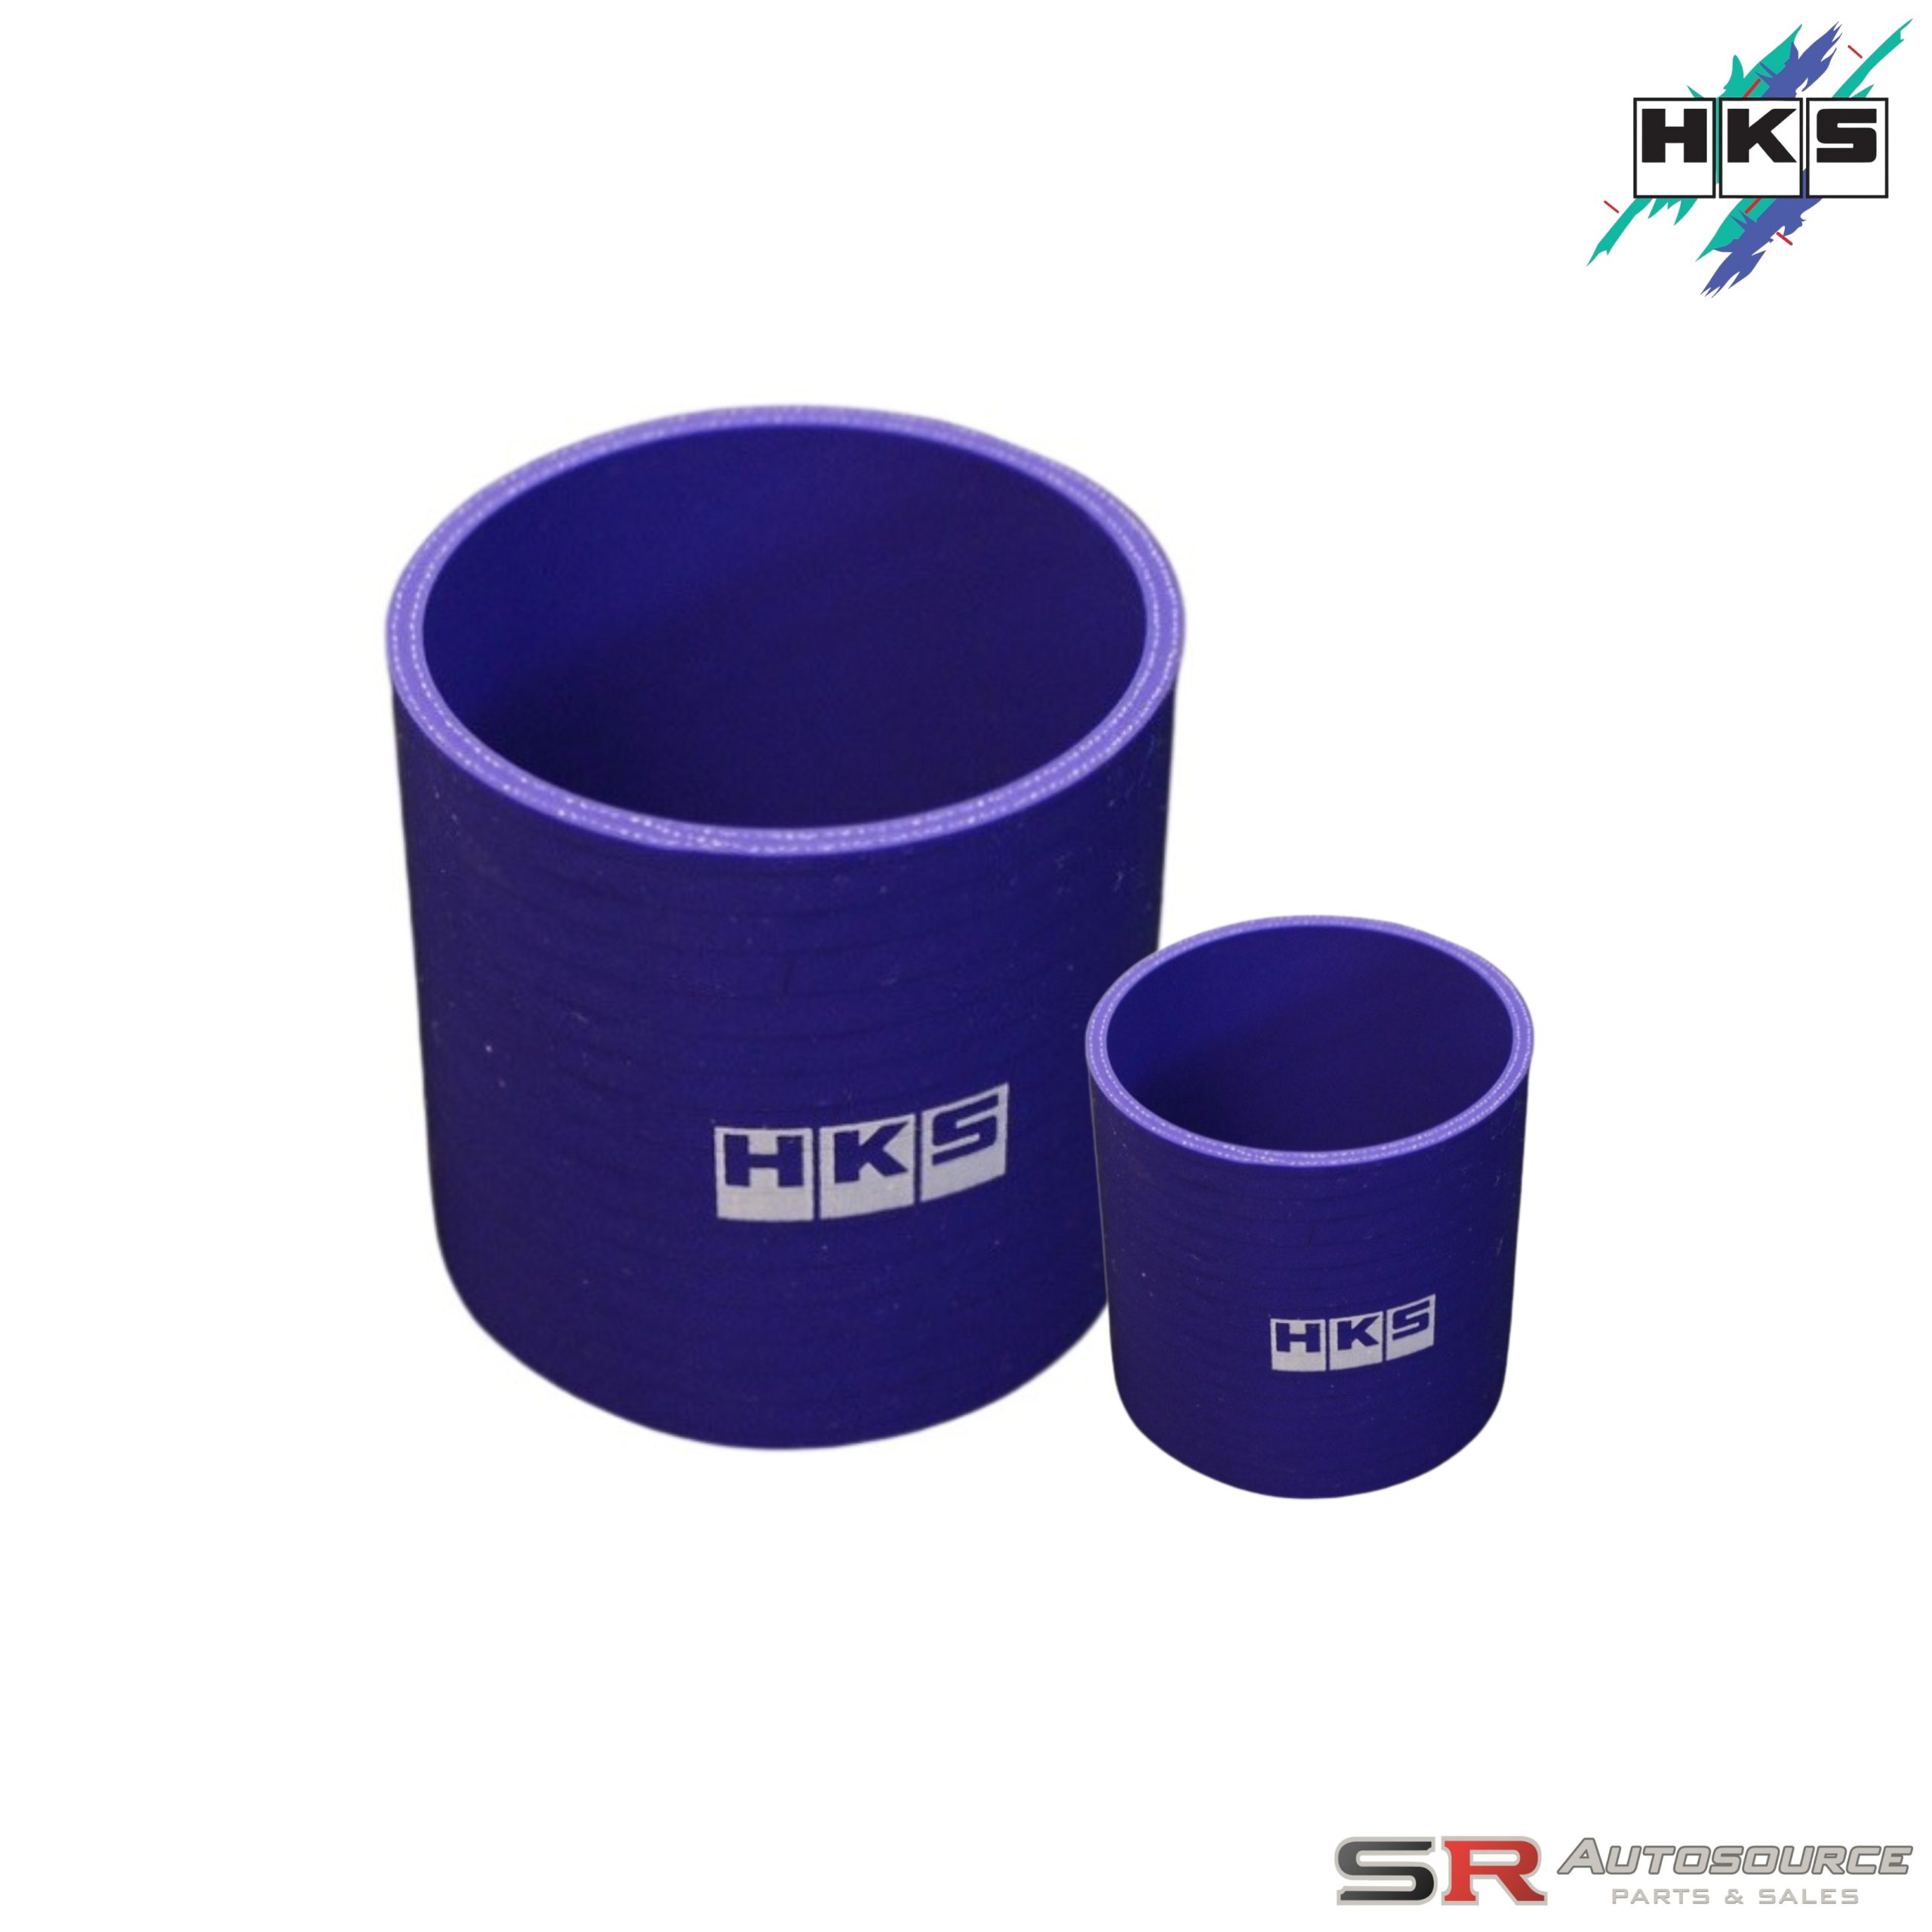 HKS Silicone Couplers – Various Sizes